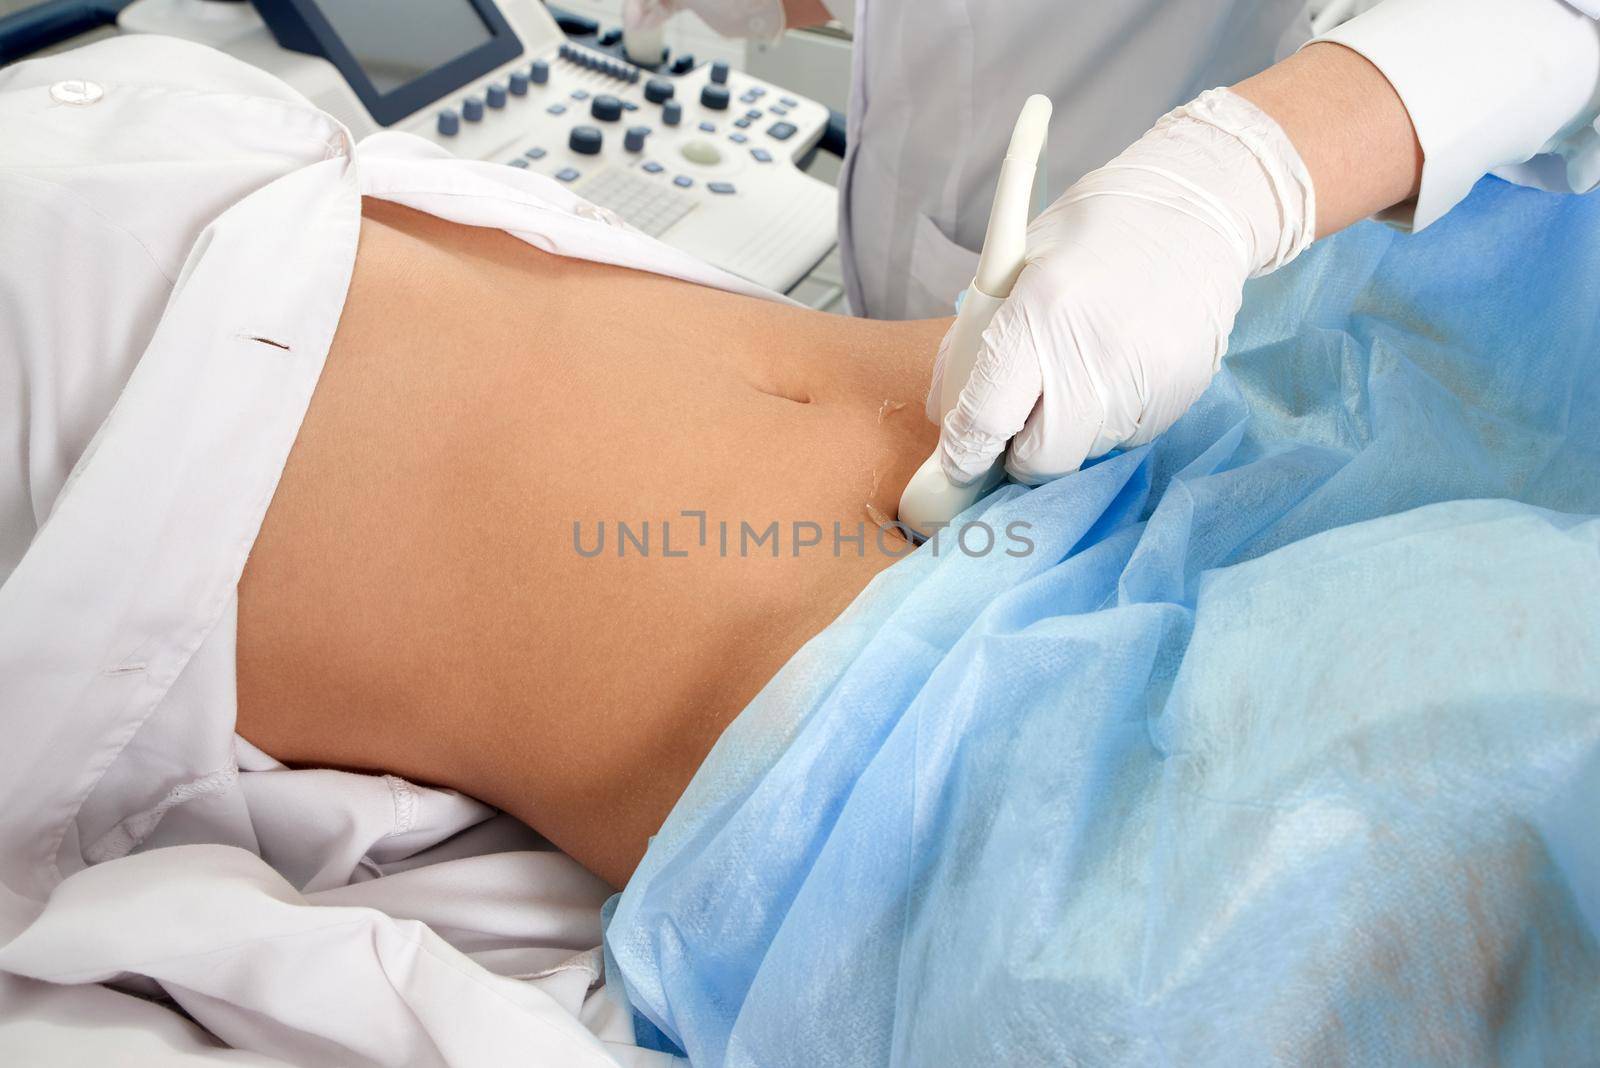 Cropped view of woman at gynecologist's doing ultrasound scan by Mariakray